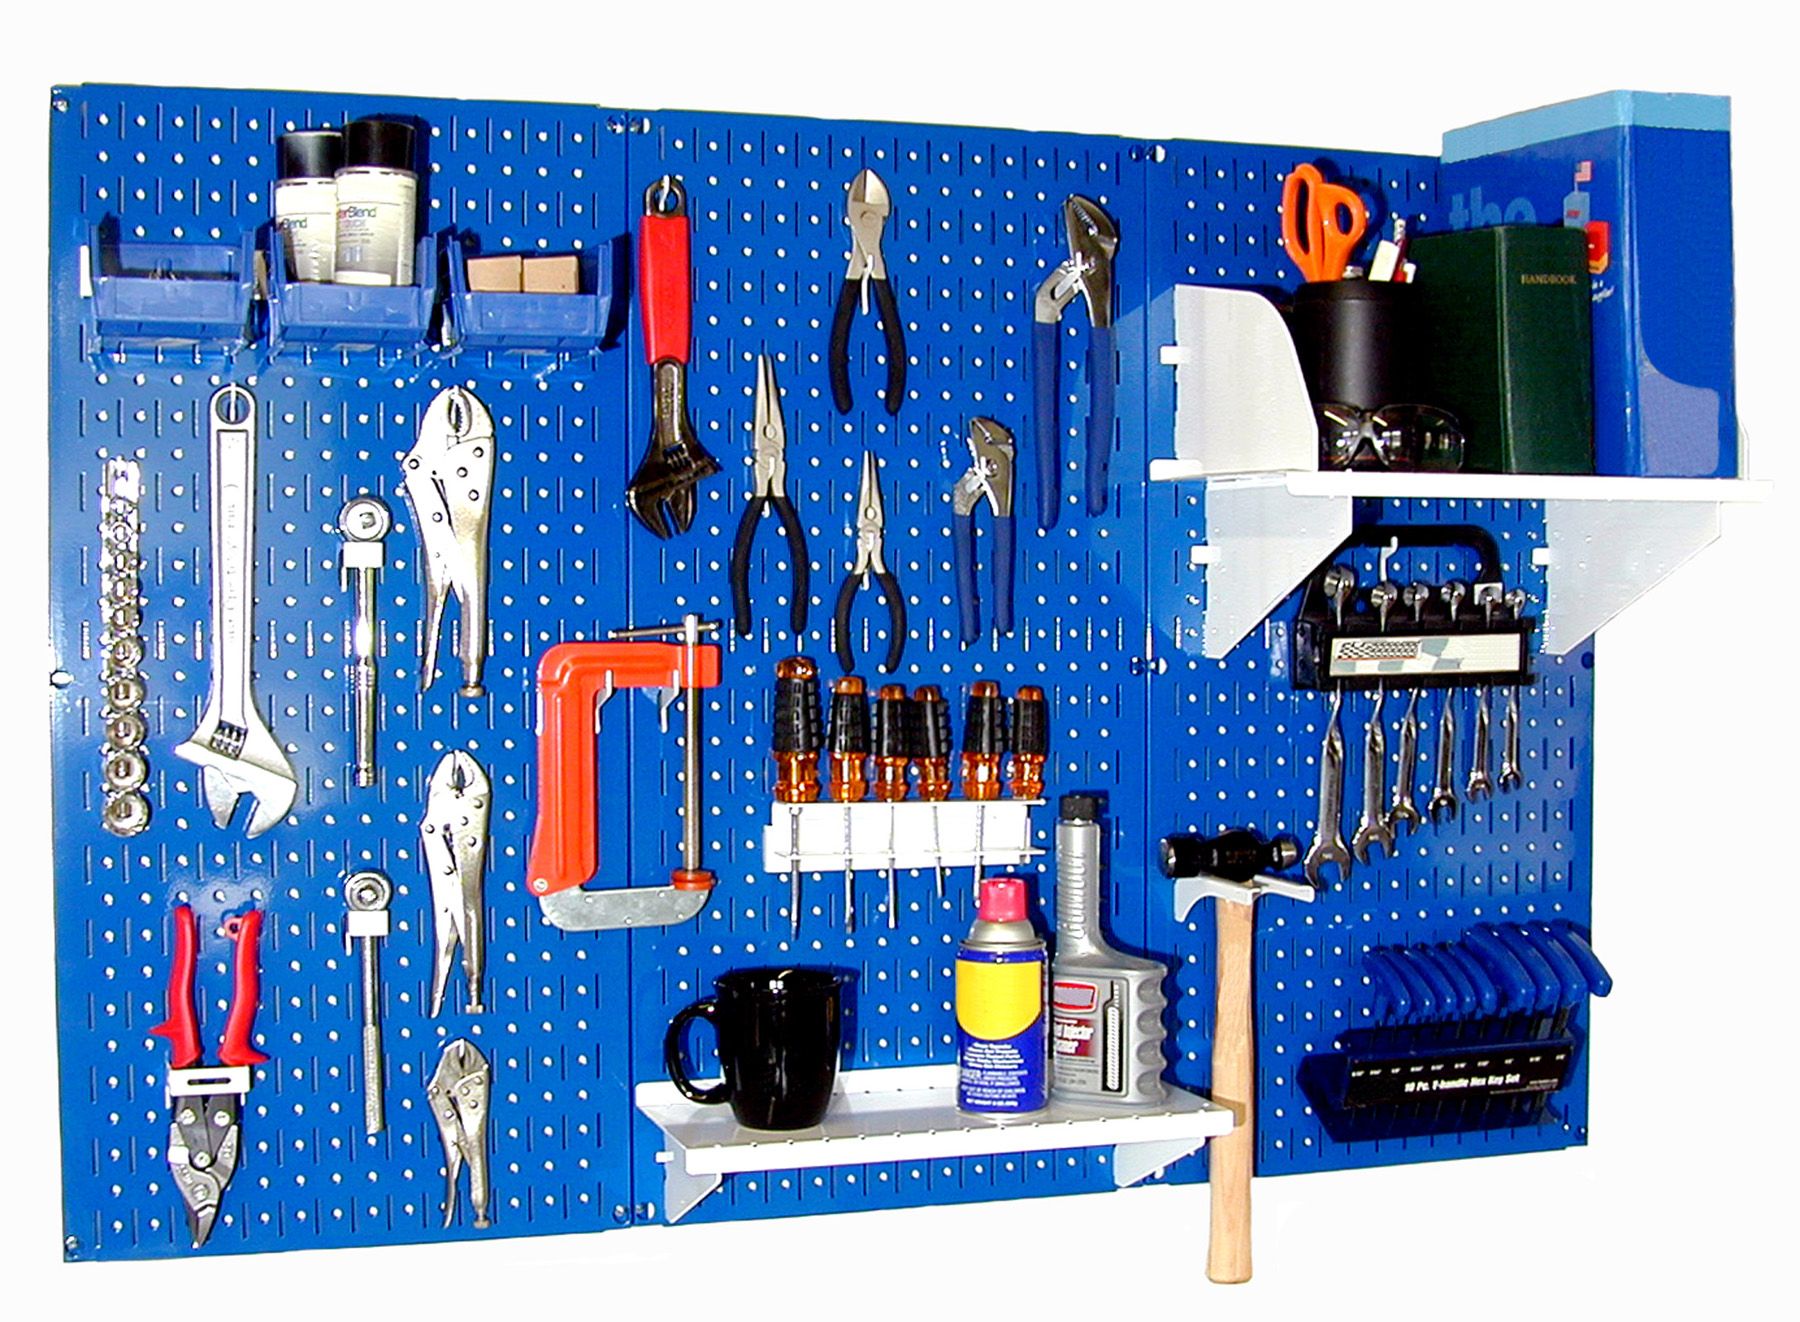 Pegboard walls for organizing small tools and boating equipment